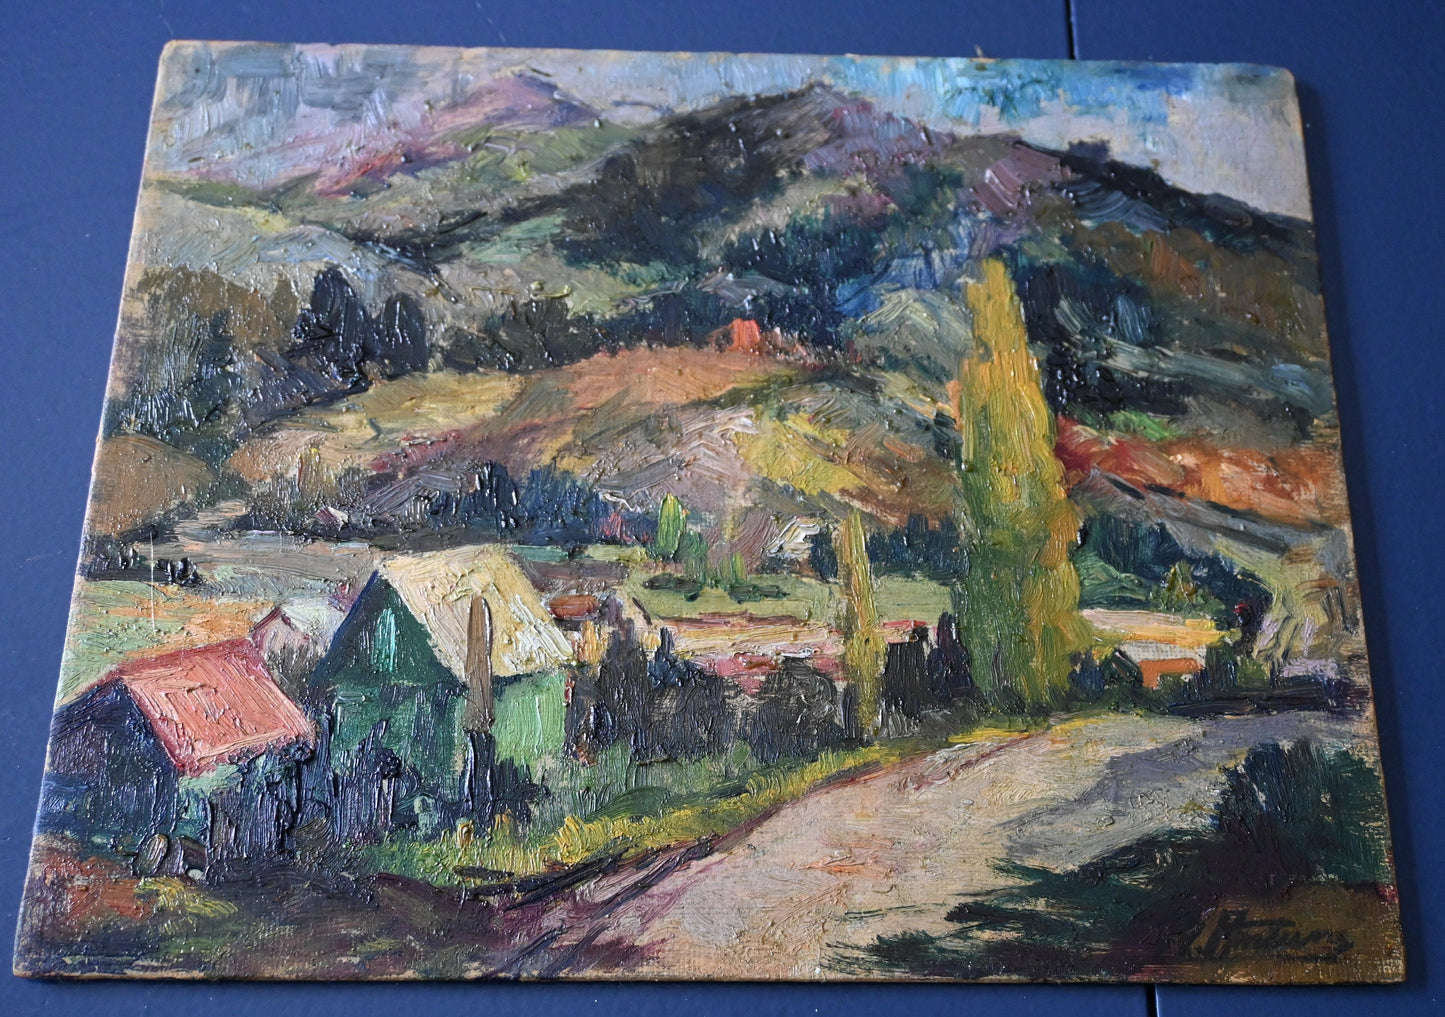 Gorgeous Tuscan Village Oil Painting -signature illegible needs research -14 X 12 1/4 inches- Masterfully executed